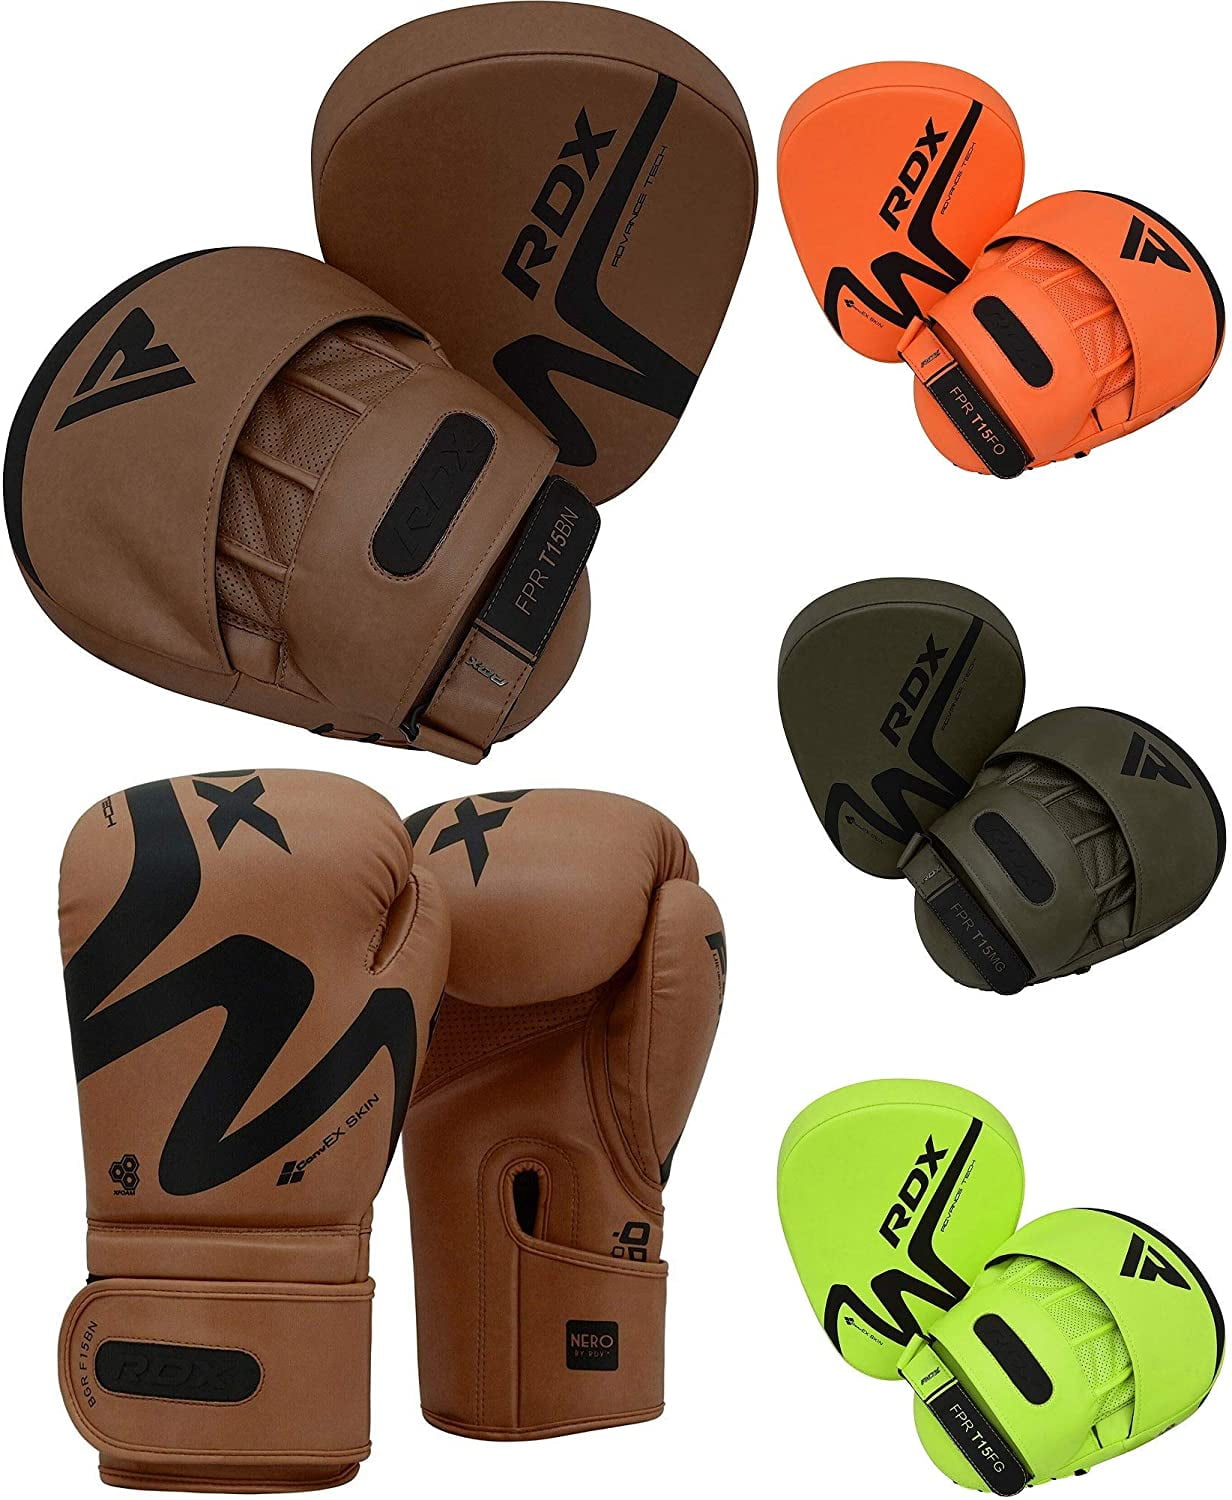 Focus Pad,Hook & Jab Mitts,Boxing Punch Gloves Bag Kick Thai Curved MMA R A X 